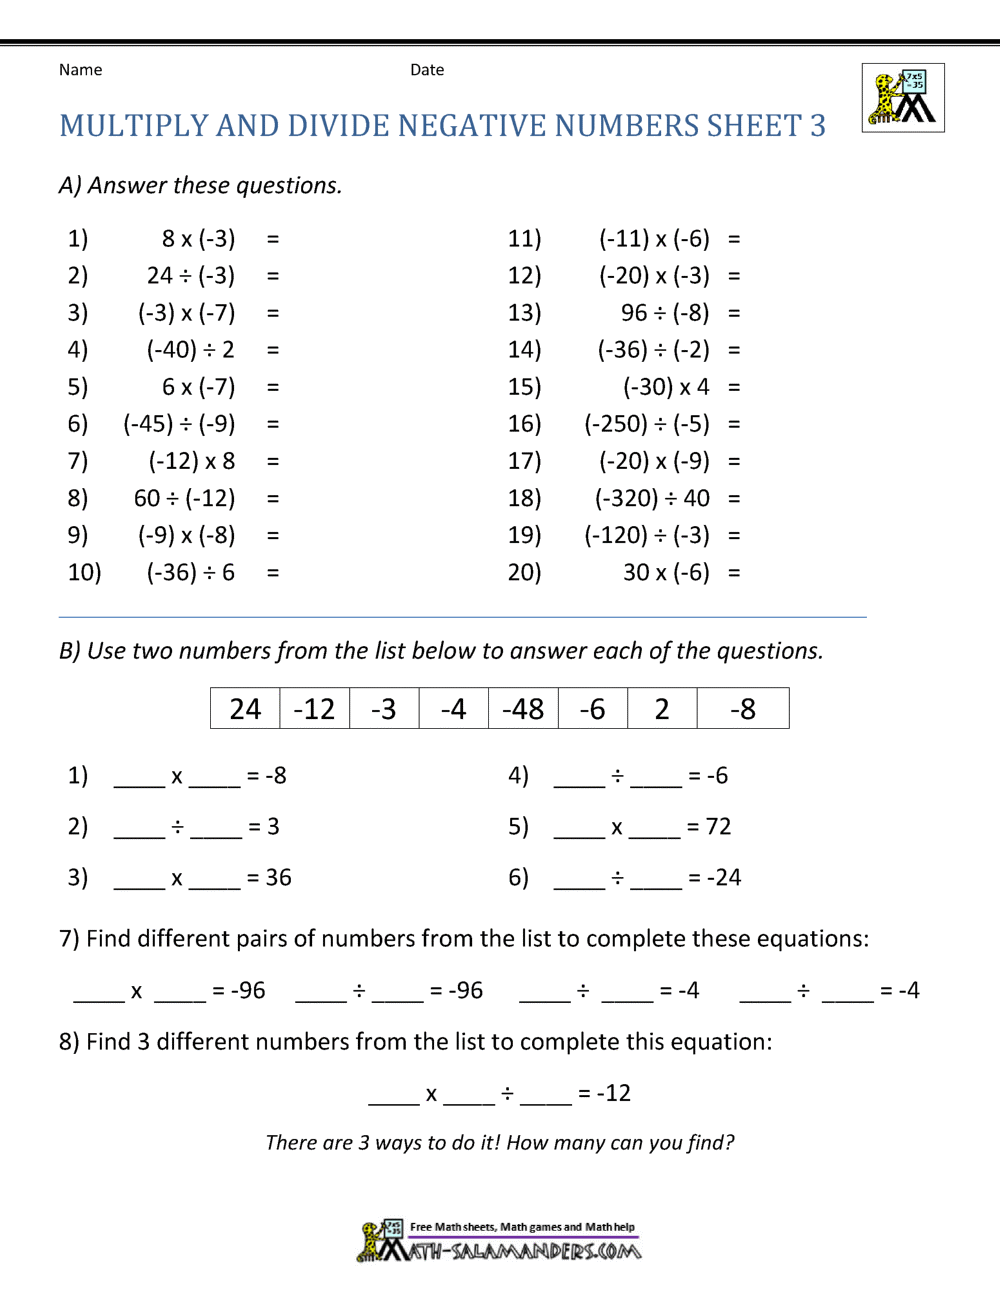 Multiply and Divide Negative Numbers For Multiplying And Dividing Integers Worksheet